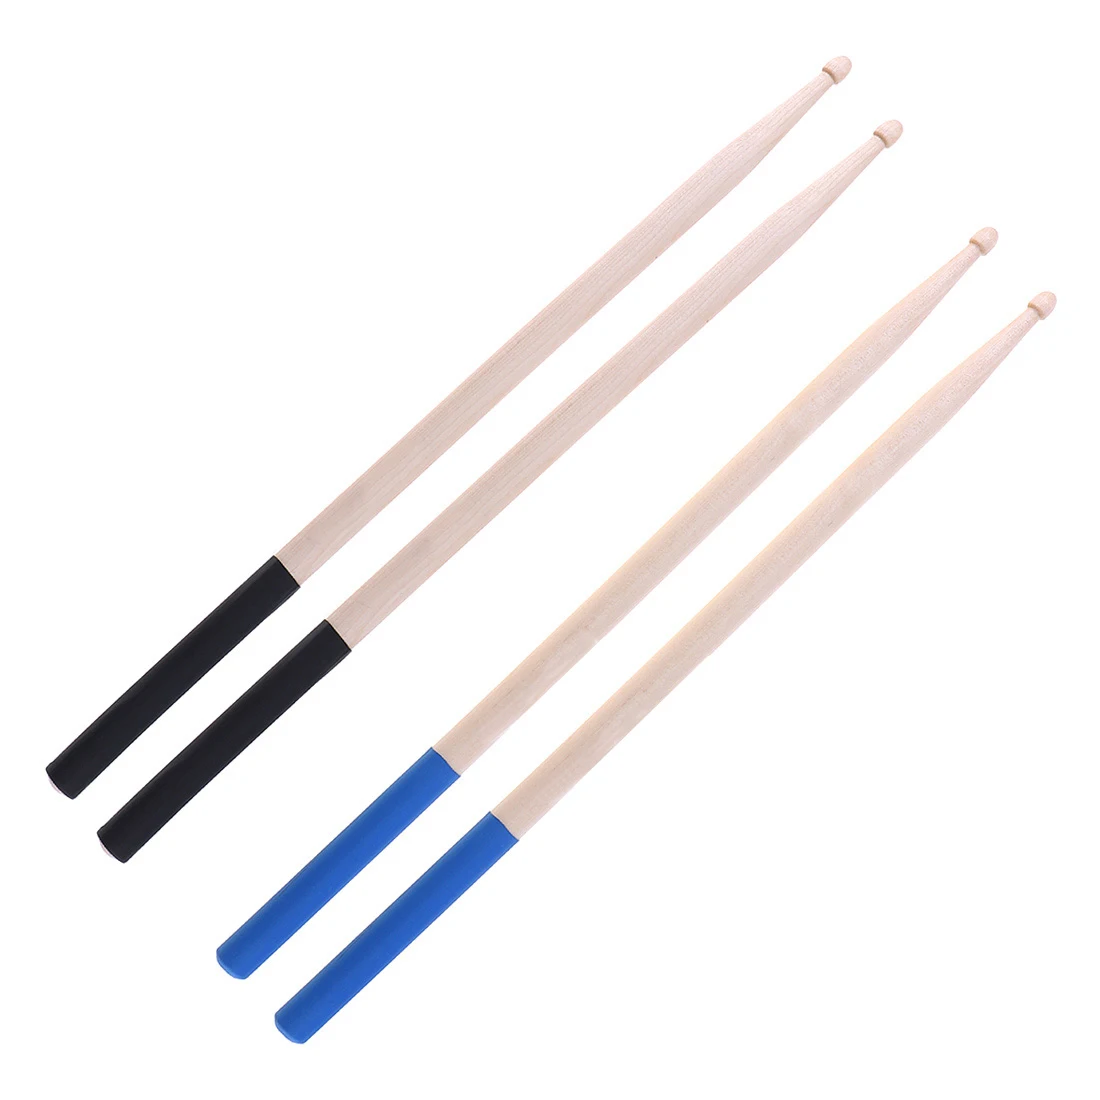 

1 Pair 7A Maple Drumsticks Professional high-quality Maple Wood Drum Sticks Multiple Color Options for Drums